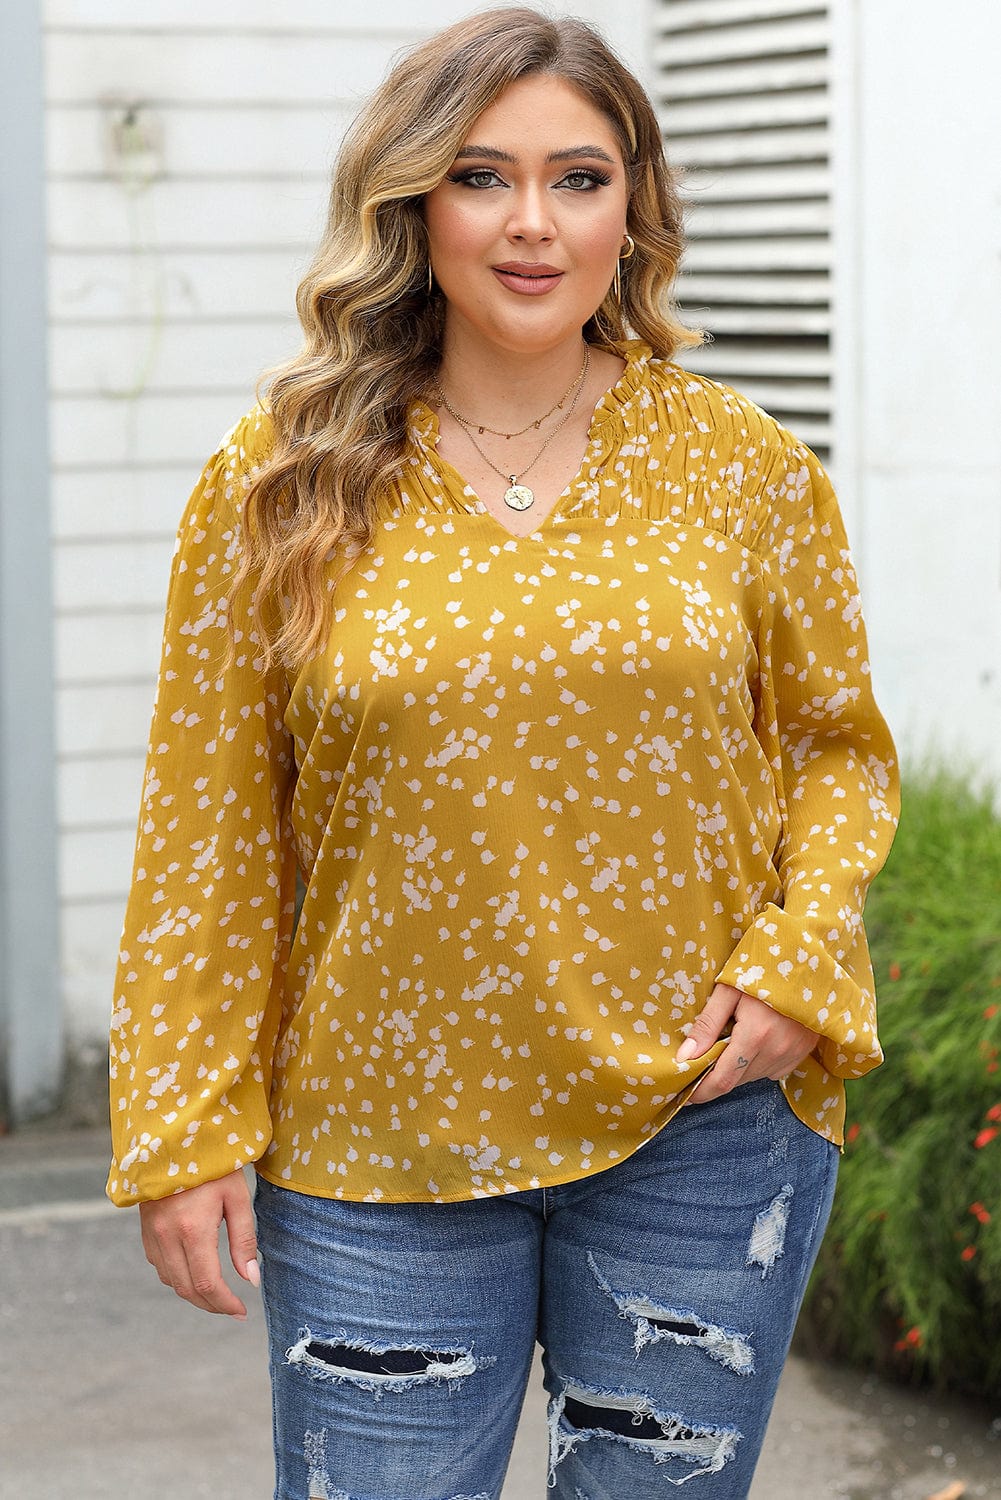 The802Gypsy  Tops Yellow / 1X / 100%Polyester TRAVELING GYPSY- Floral Printed Crinkled Blouse